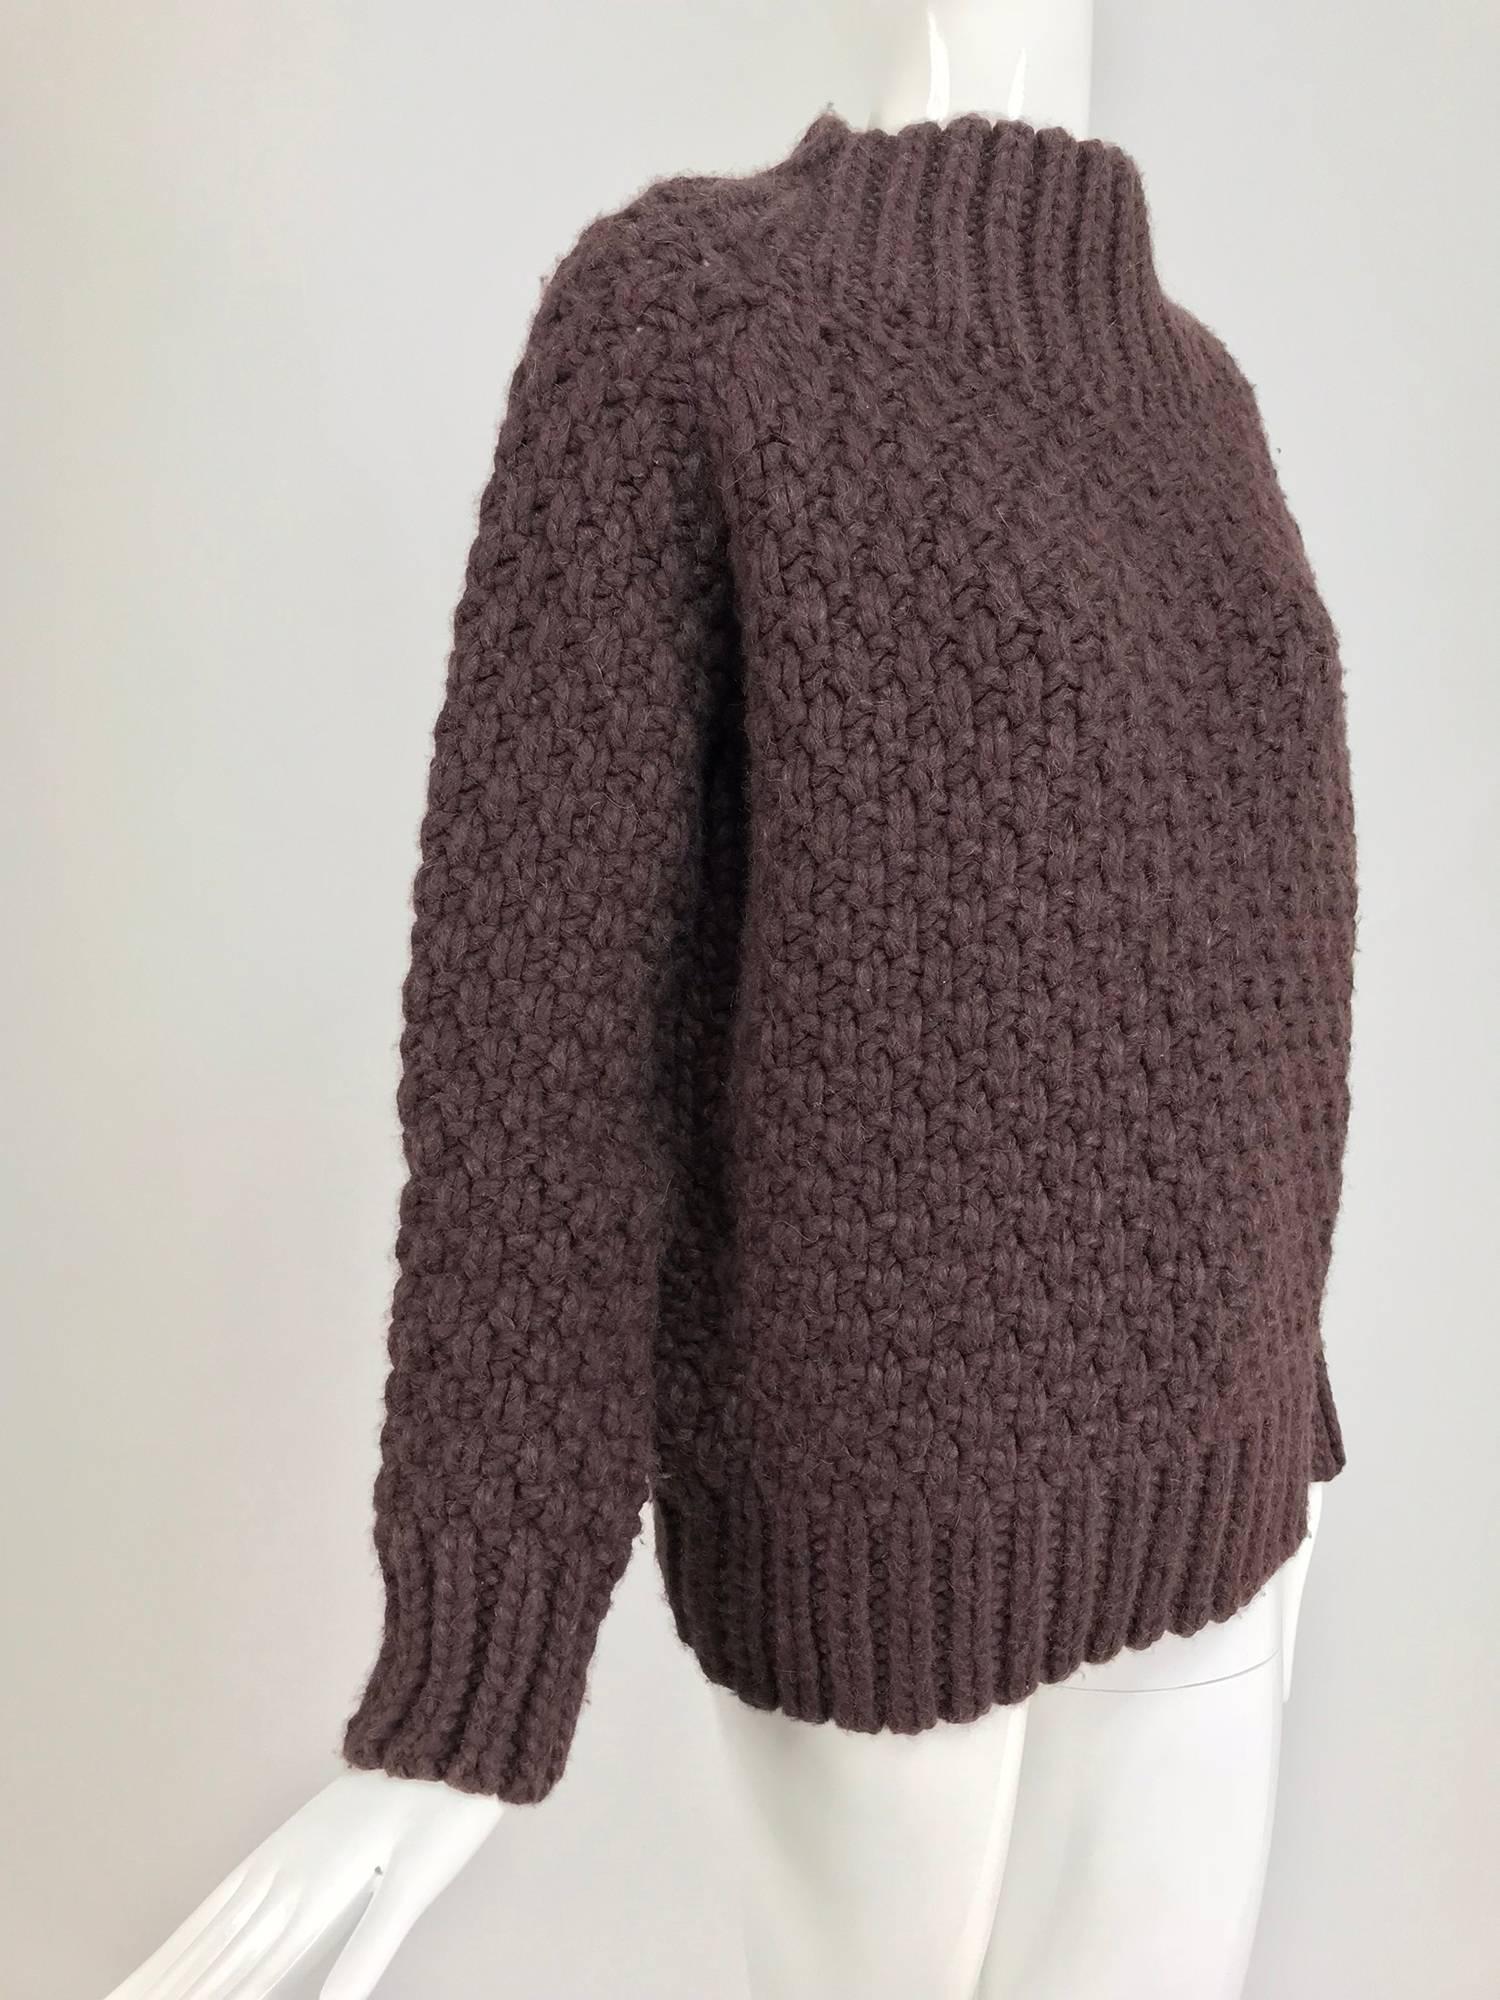 The Row chunky knit cashmere basket weave sweater in chocolate brown...Heavy ply cashmere sweater has a ribbed, mock neck, cuffs and hem...Marked size Small...

In excellent wearable condition... All our clothing is dry cleaned and inspected for